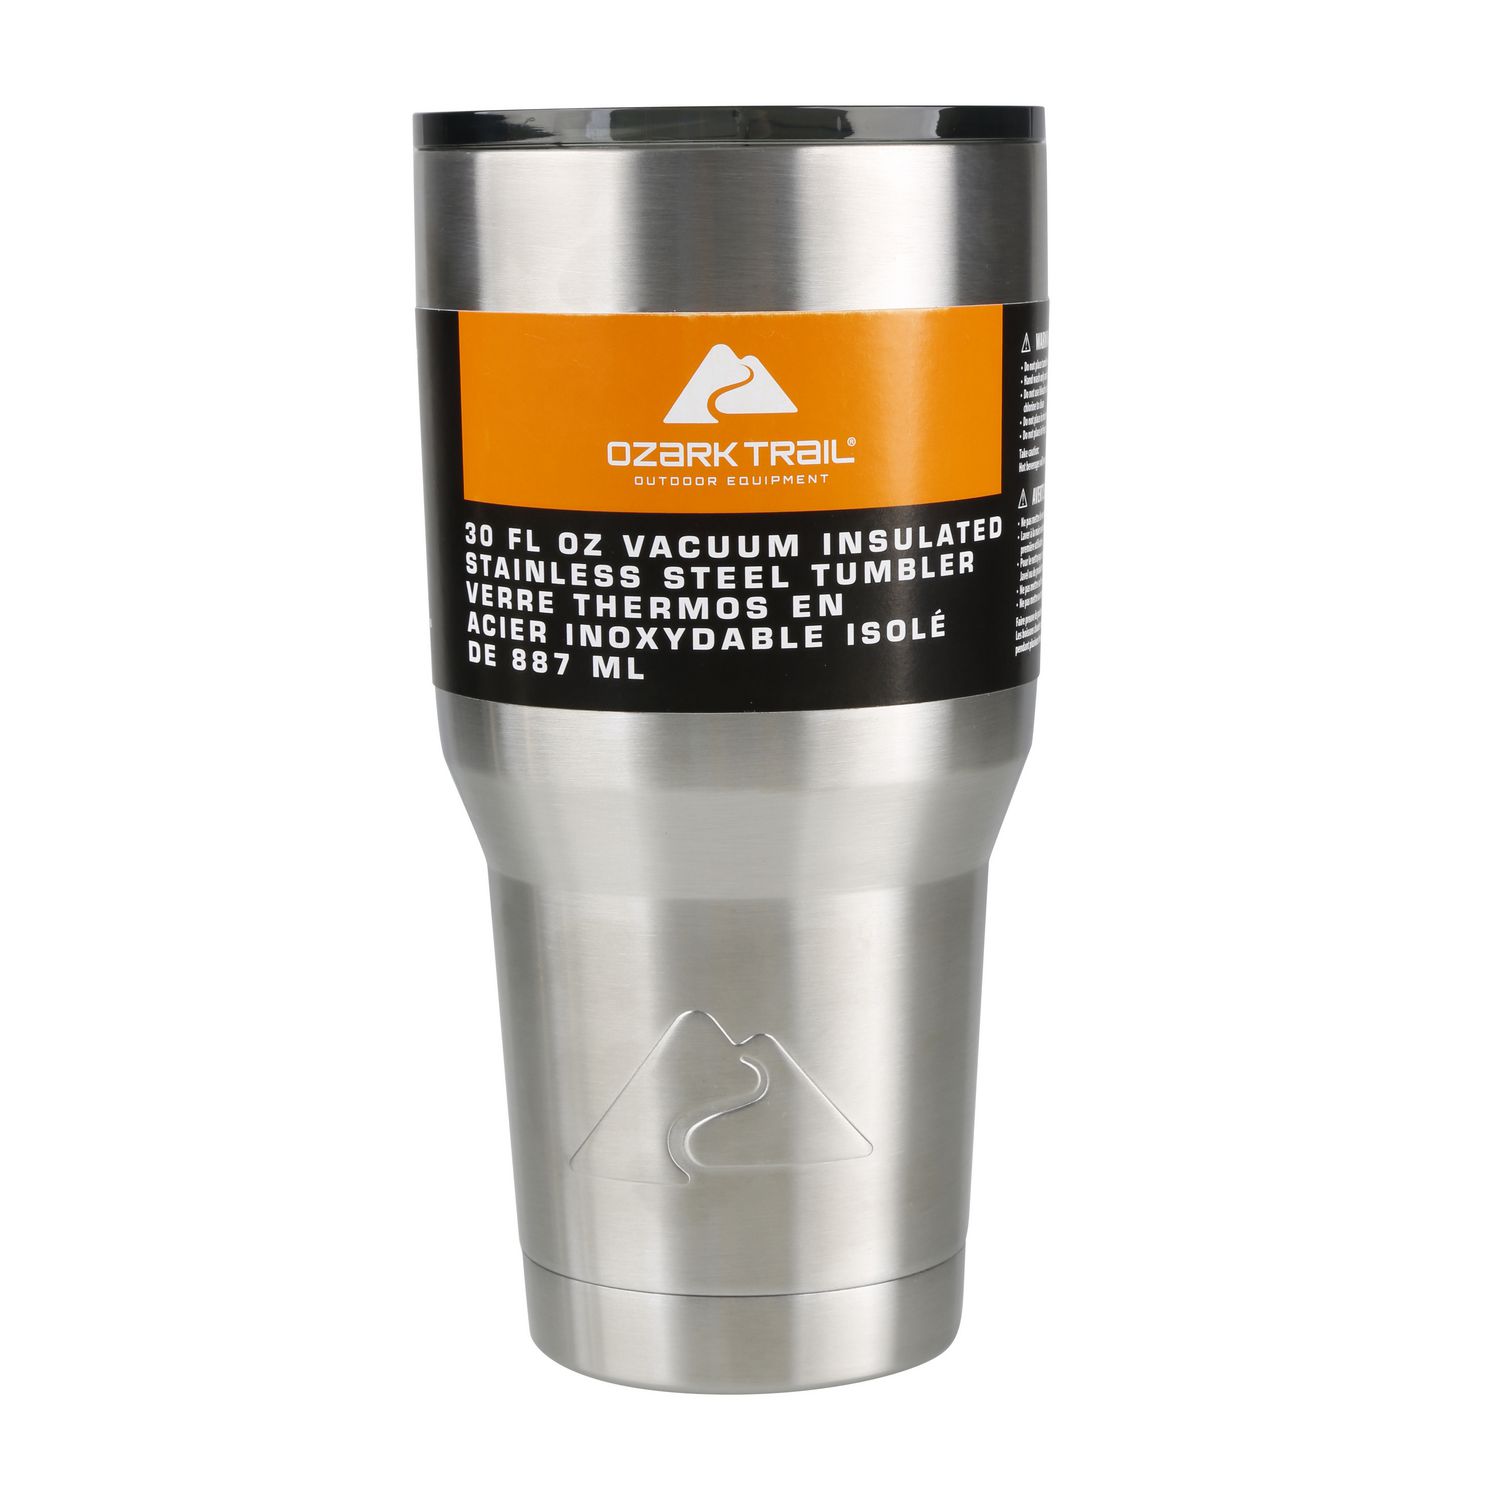 Ozark Trail Vacuum Insulated Stainless 